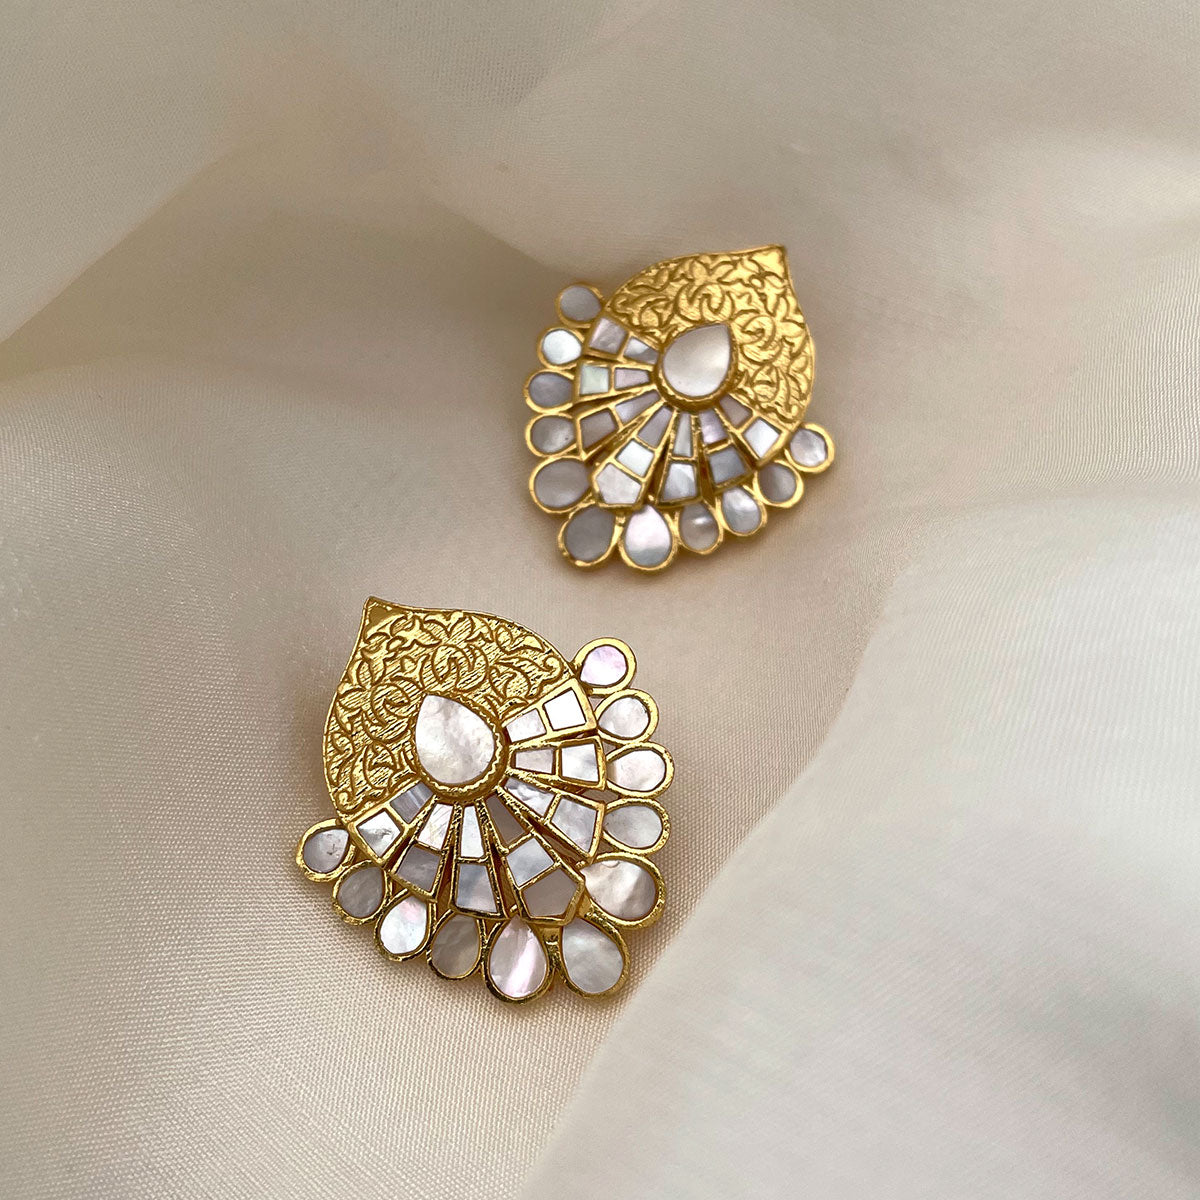 Mother of pearl - Wisteria studs